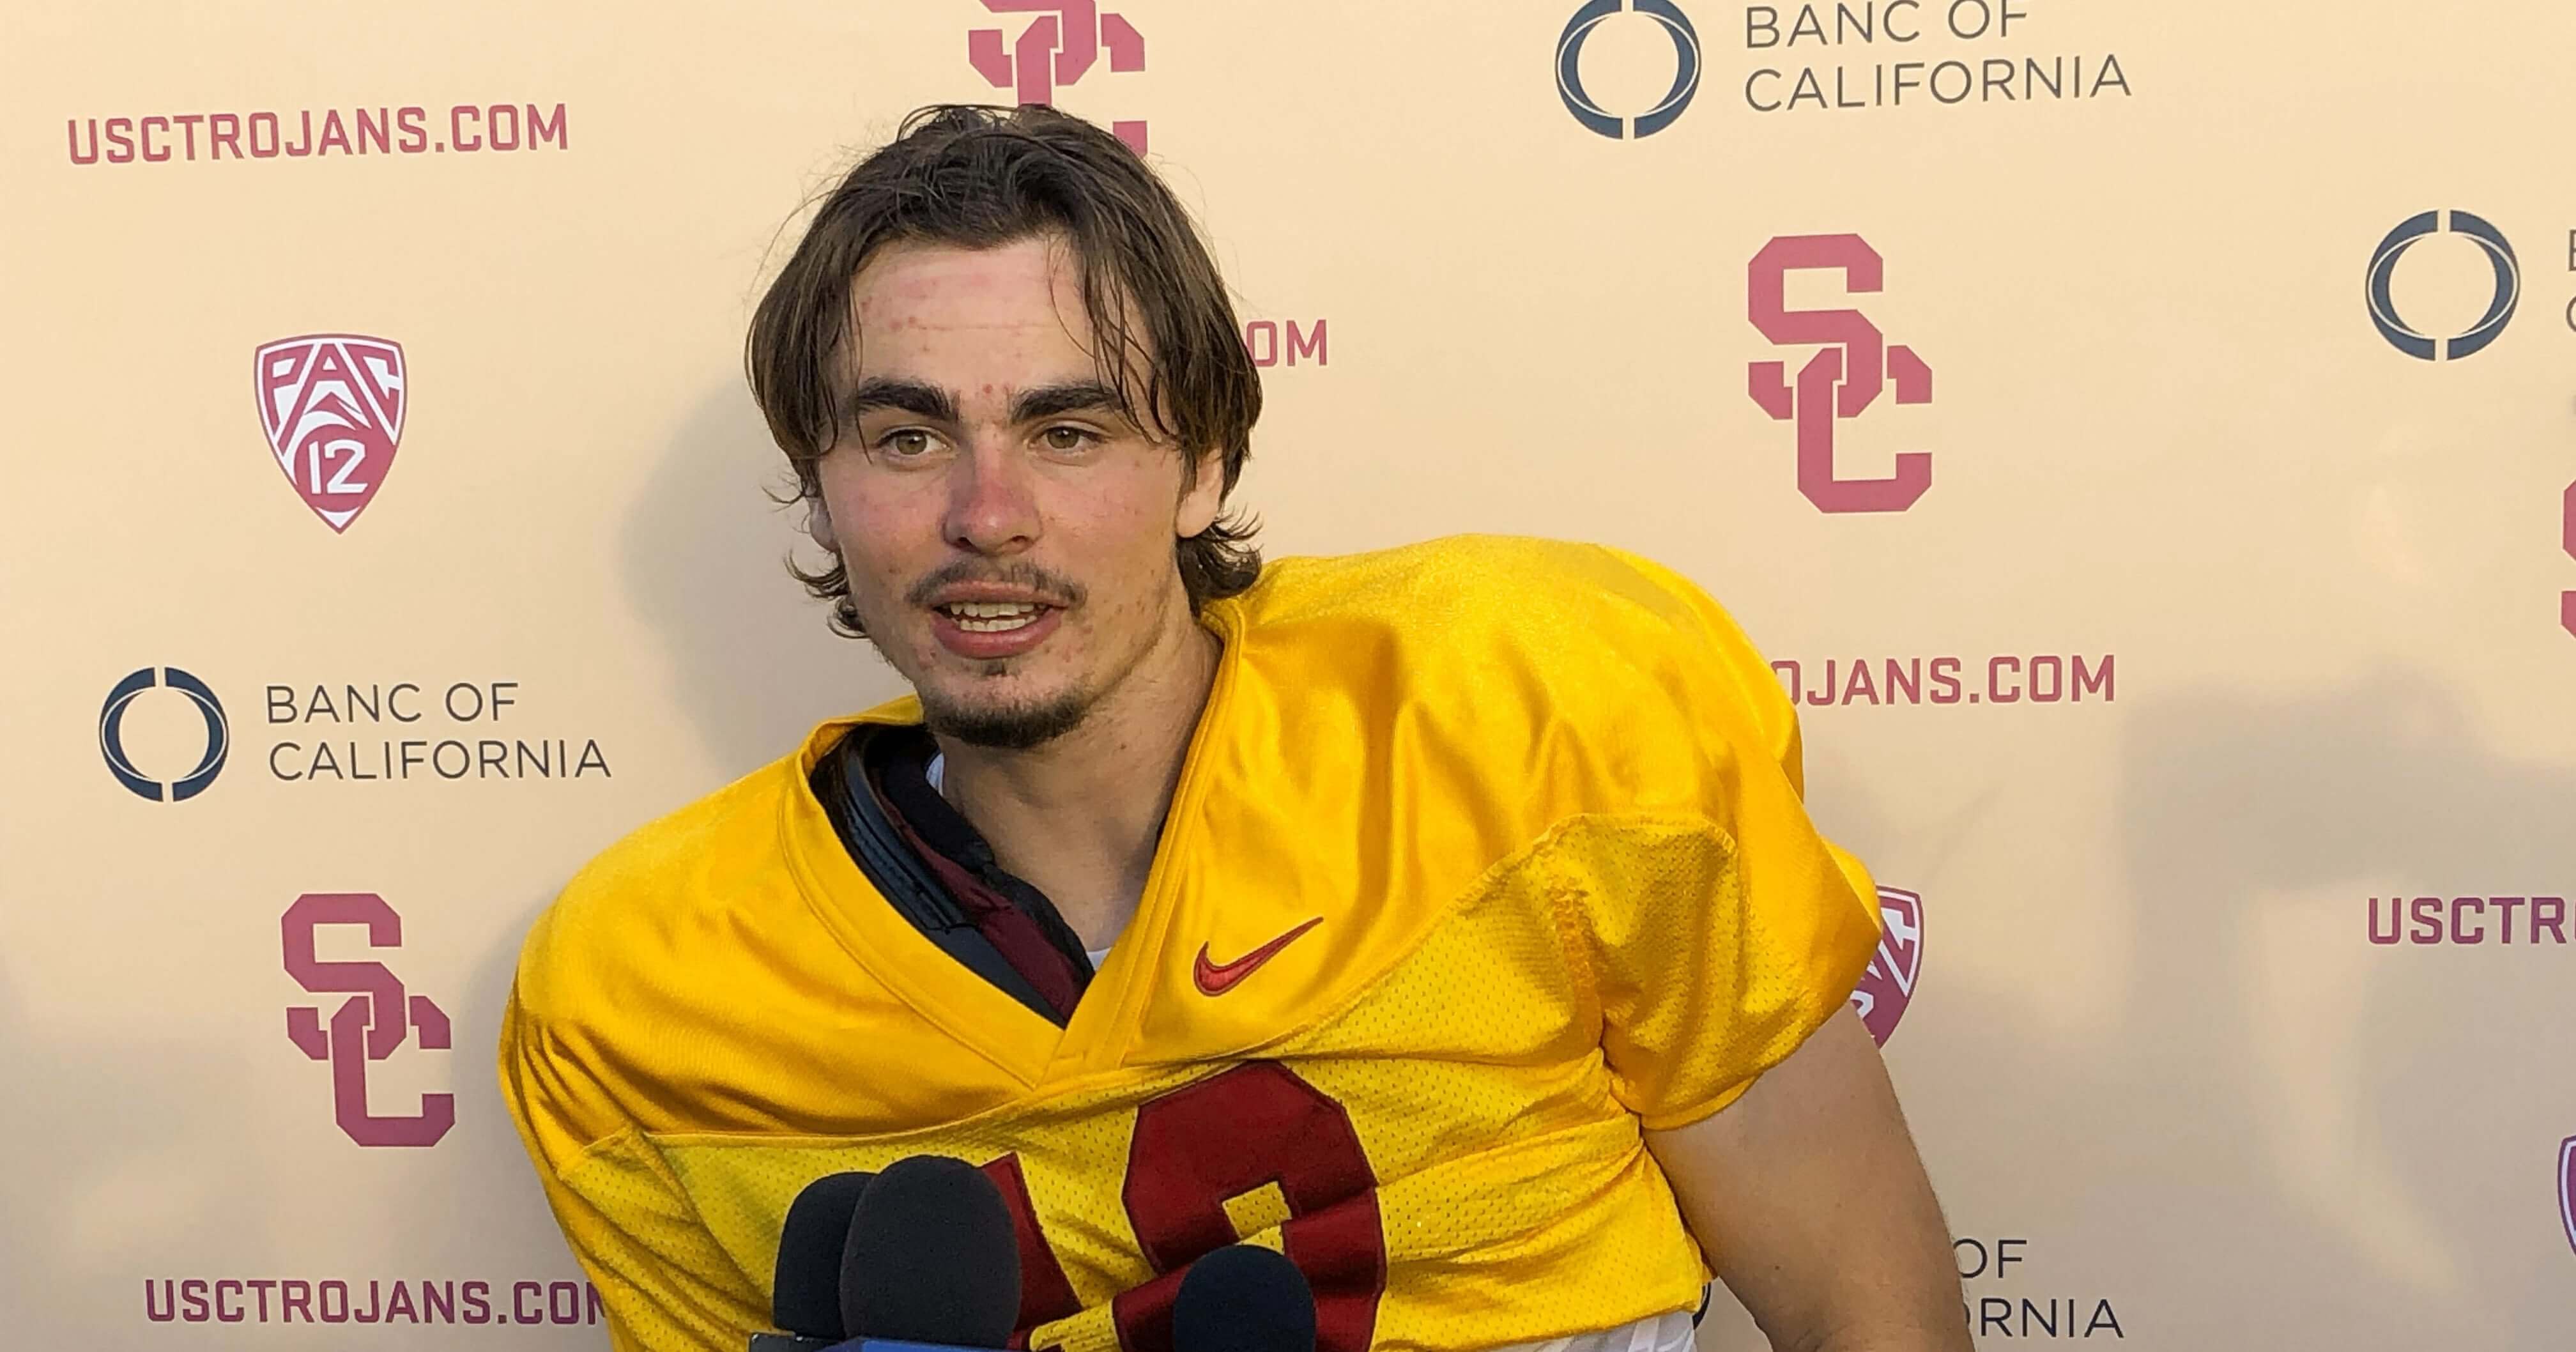 USC quarterback J.T. Daniels speaks to reporters Aug. 28 following his first practice after winning the Trojans' starting job in Los Angeles. There is little question about the talent in Daniels, USC’s first true freshman starting quarterback in a decade.